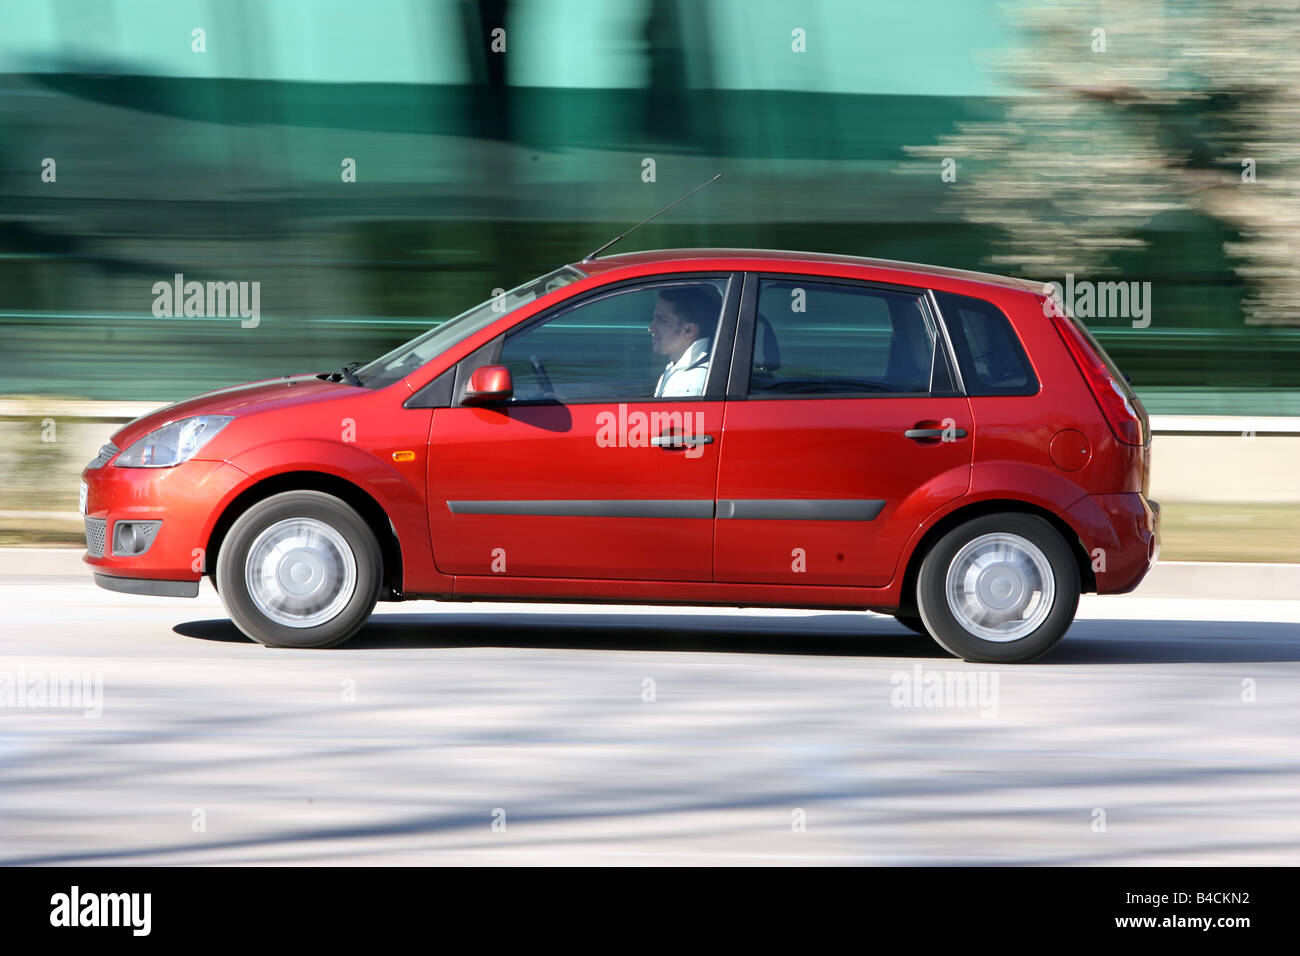 Ford Fiesta 1.4 16V, model year 2005-, rust-red, driving, side view, City  Stock Photo - Alamy